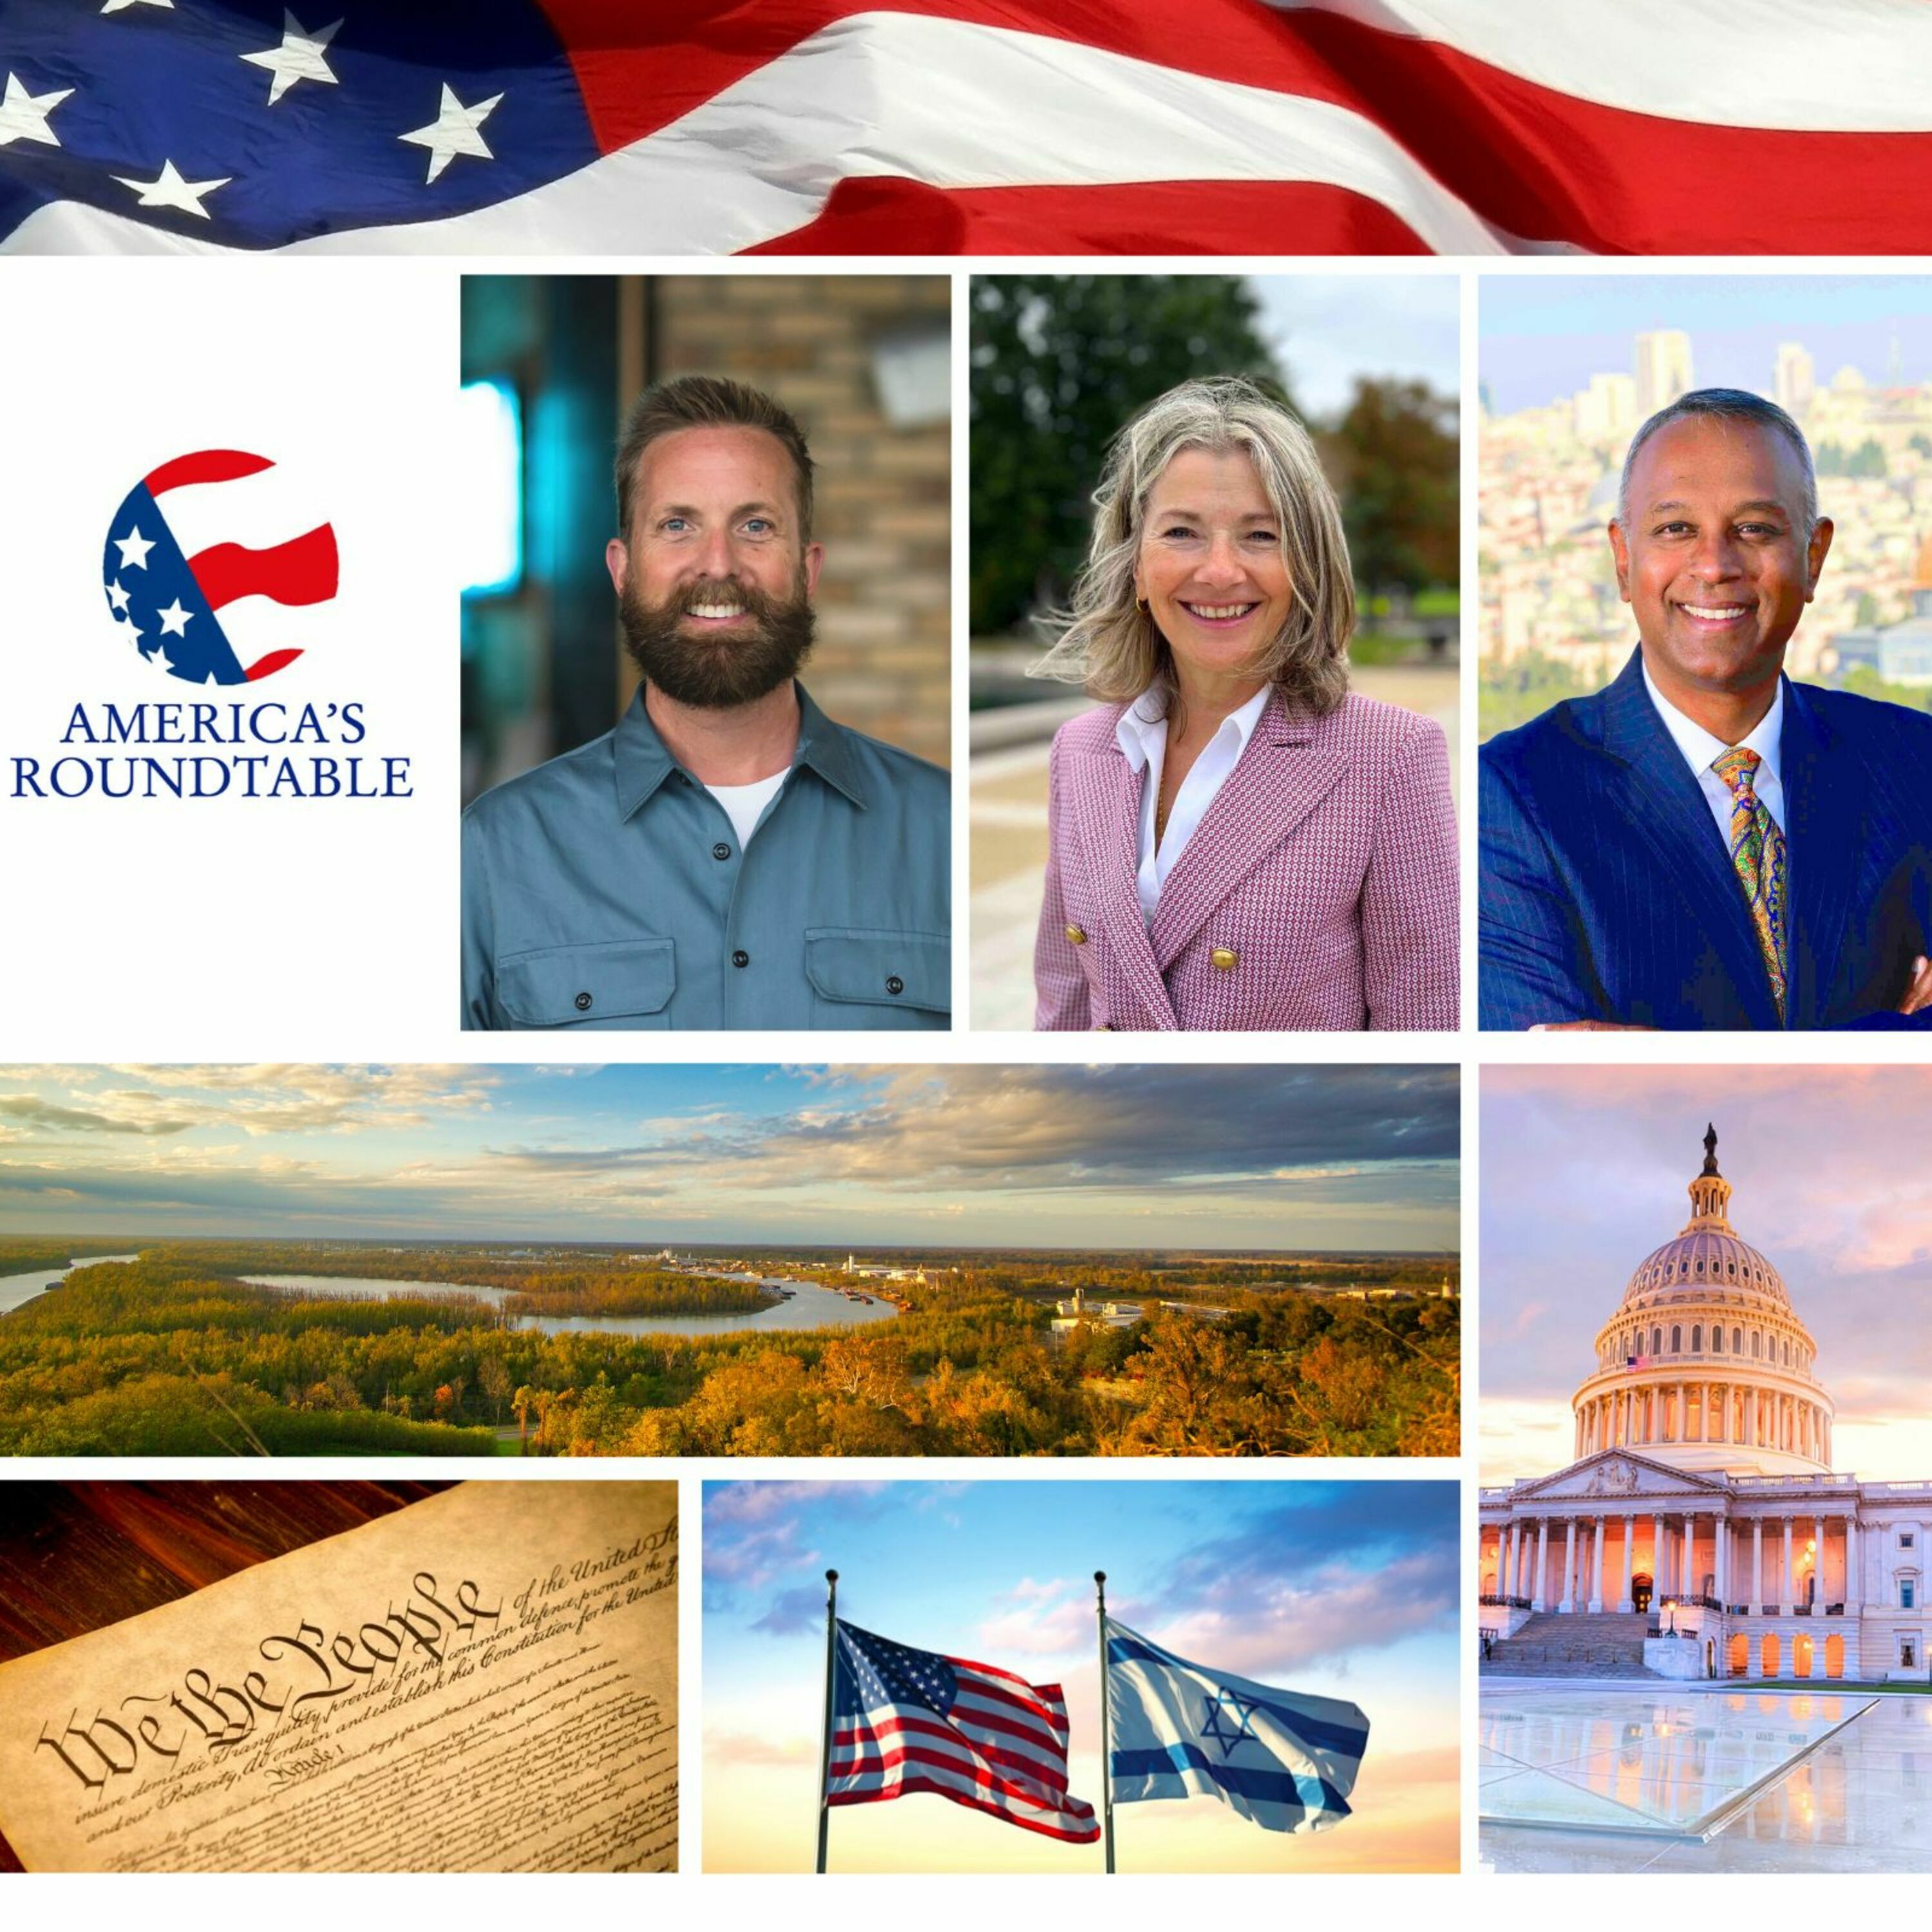 America's Roundtable with Geoff Eckart | America's National Day of Prayer | Addressing America's Challenges | The Rise of Anti-Semitism and the Dangerous Anti-Israel Sentiment Across America's College Campuses